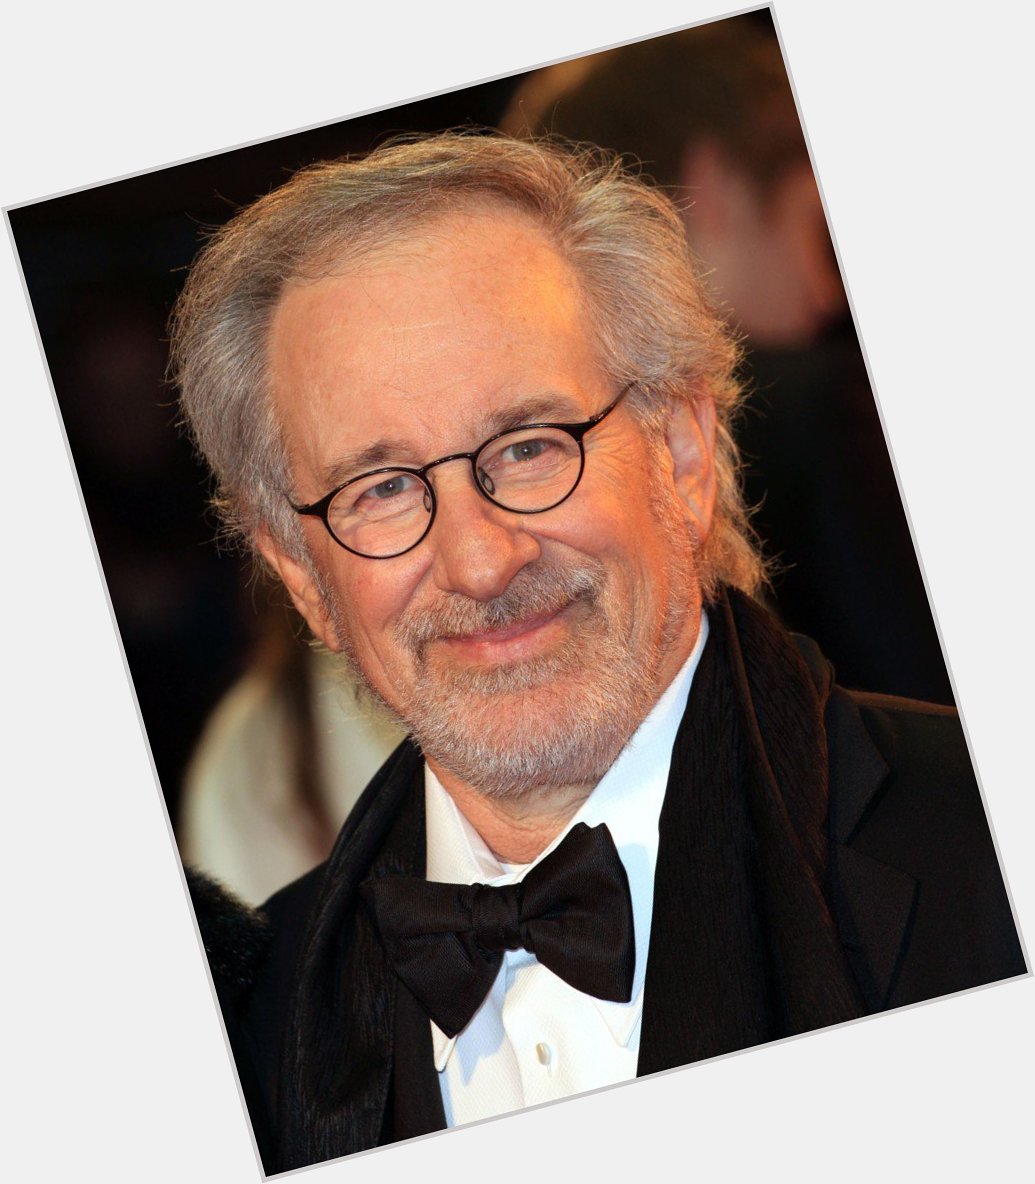  on with wishes Steven Spielberg
 a happy birthday! 